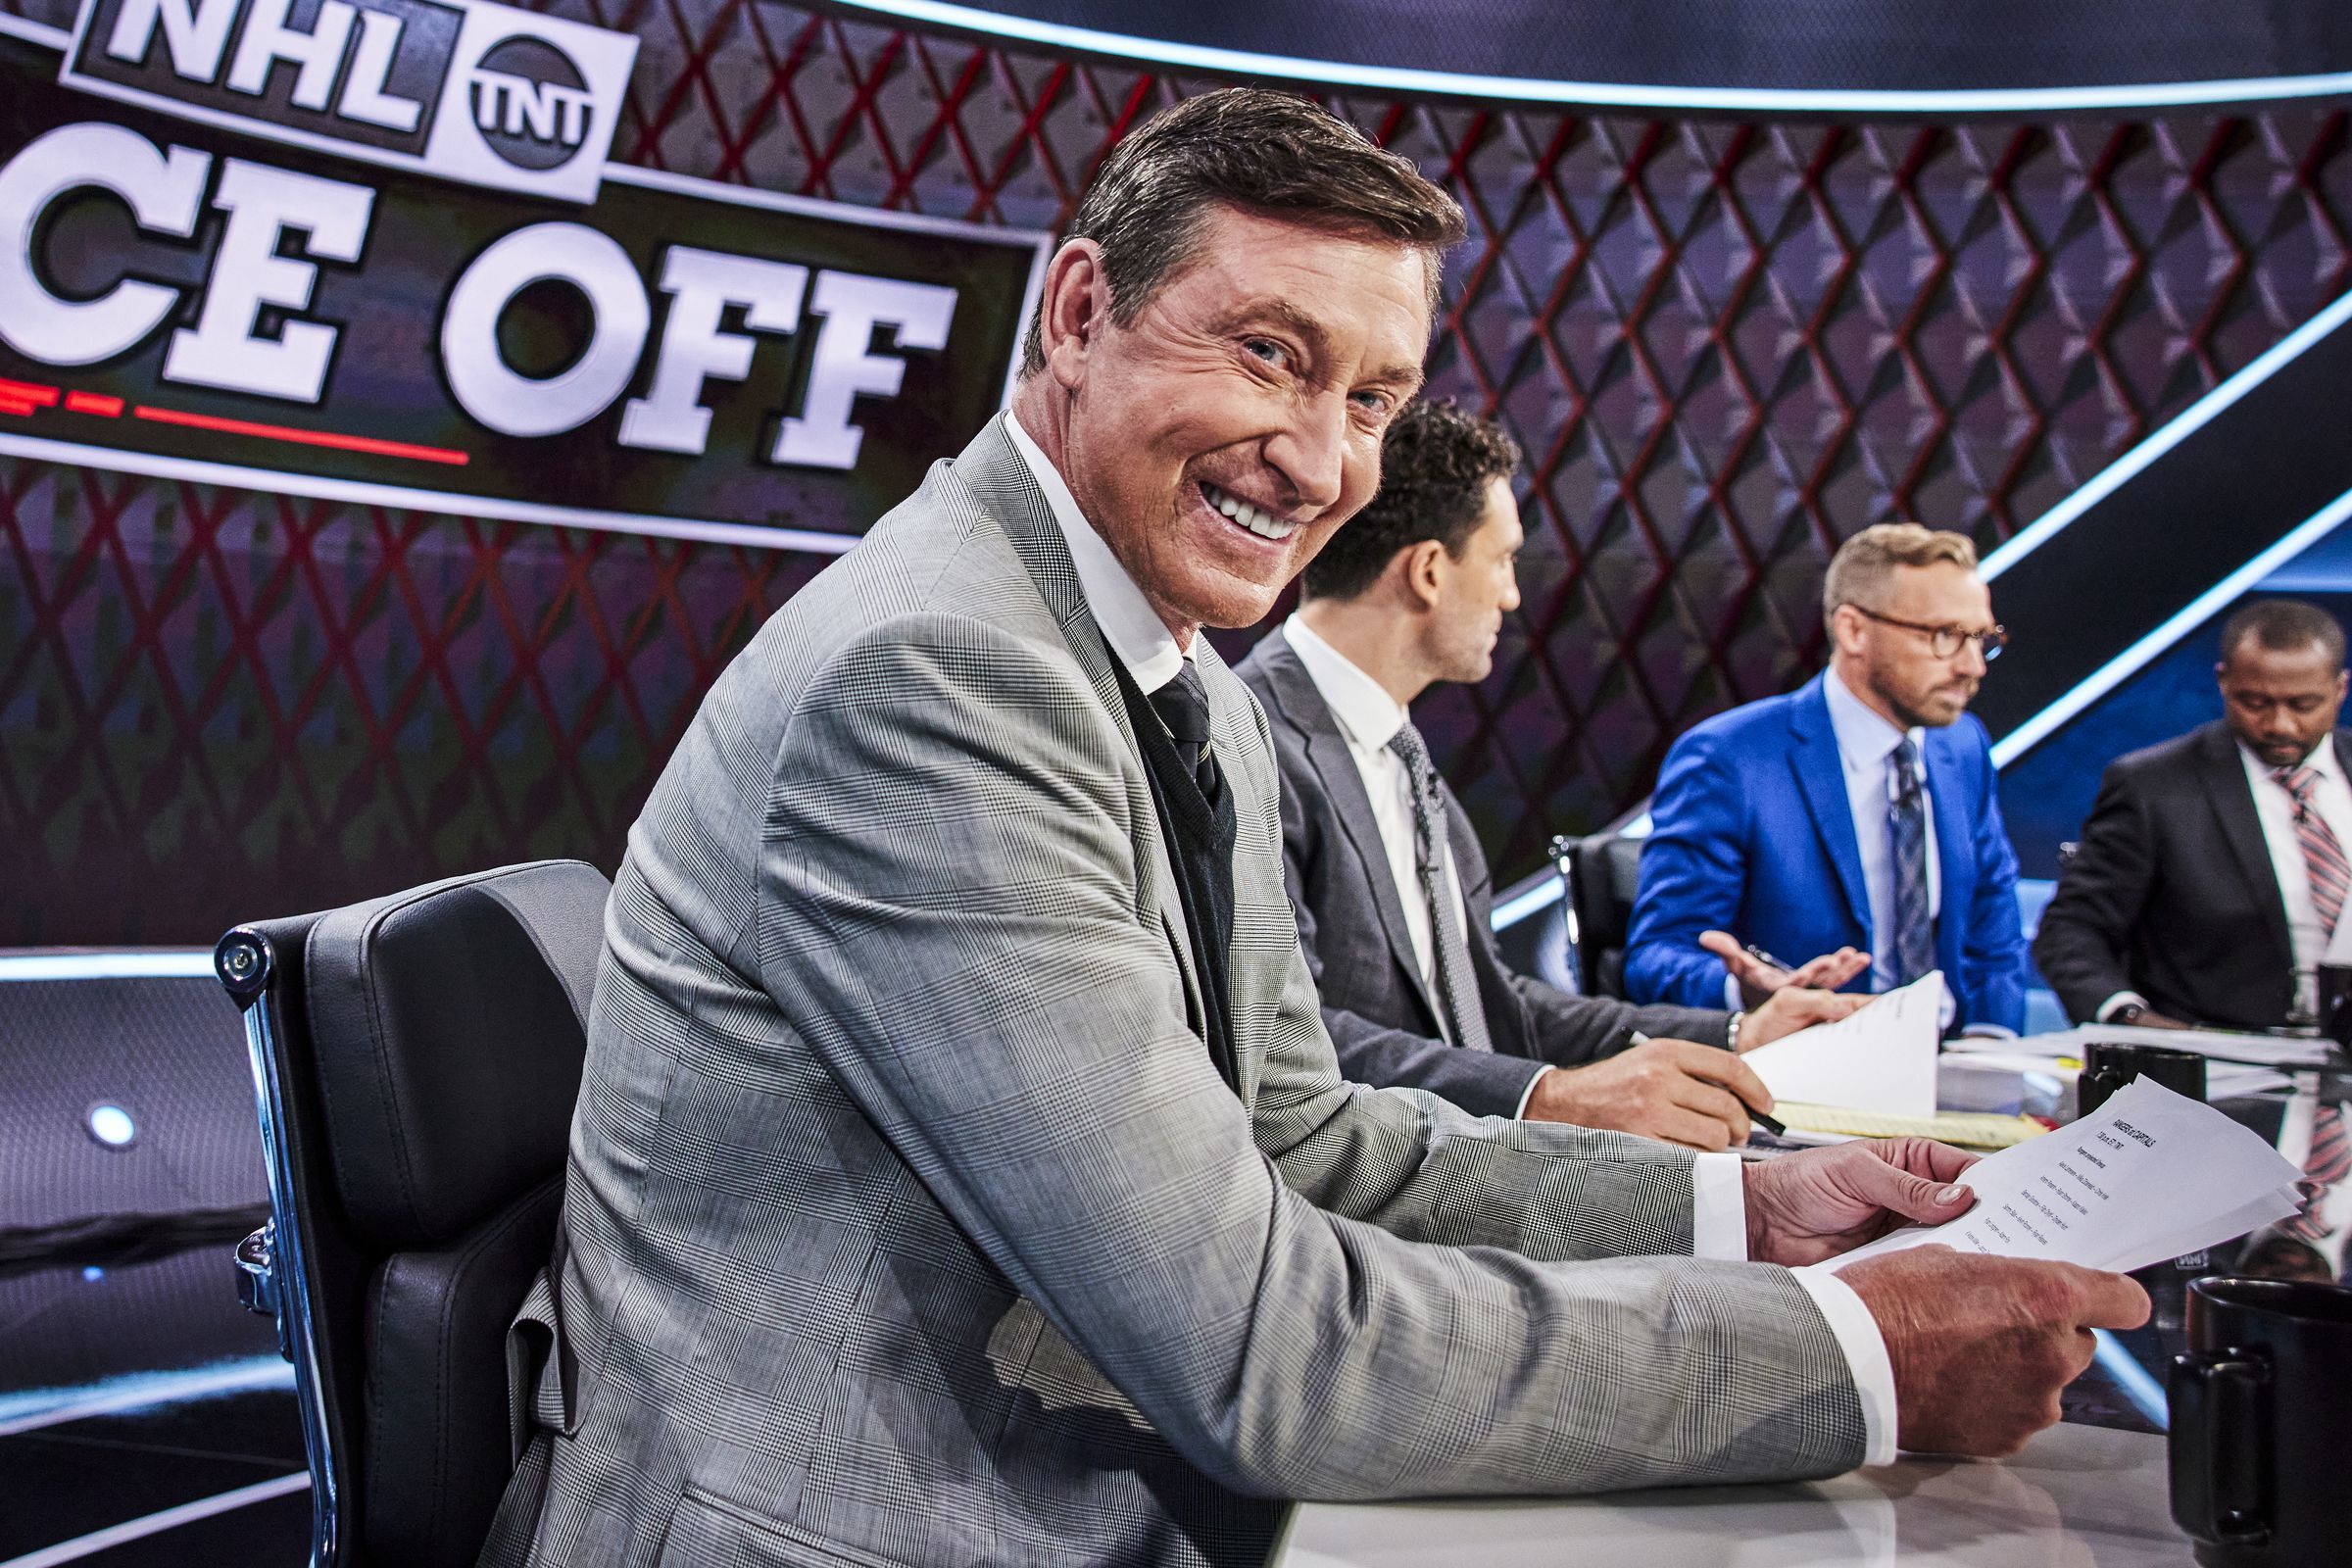 When is Wayne Gretzky returning to 'NHL on TNT'?